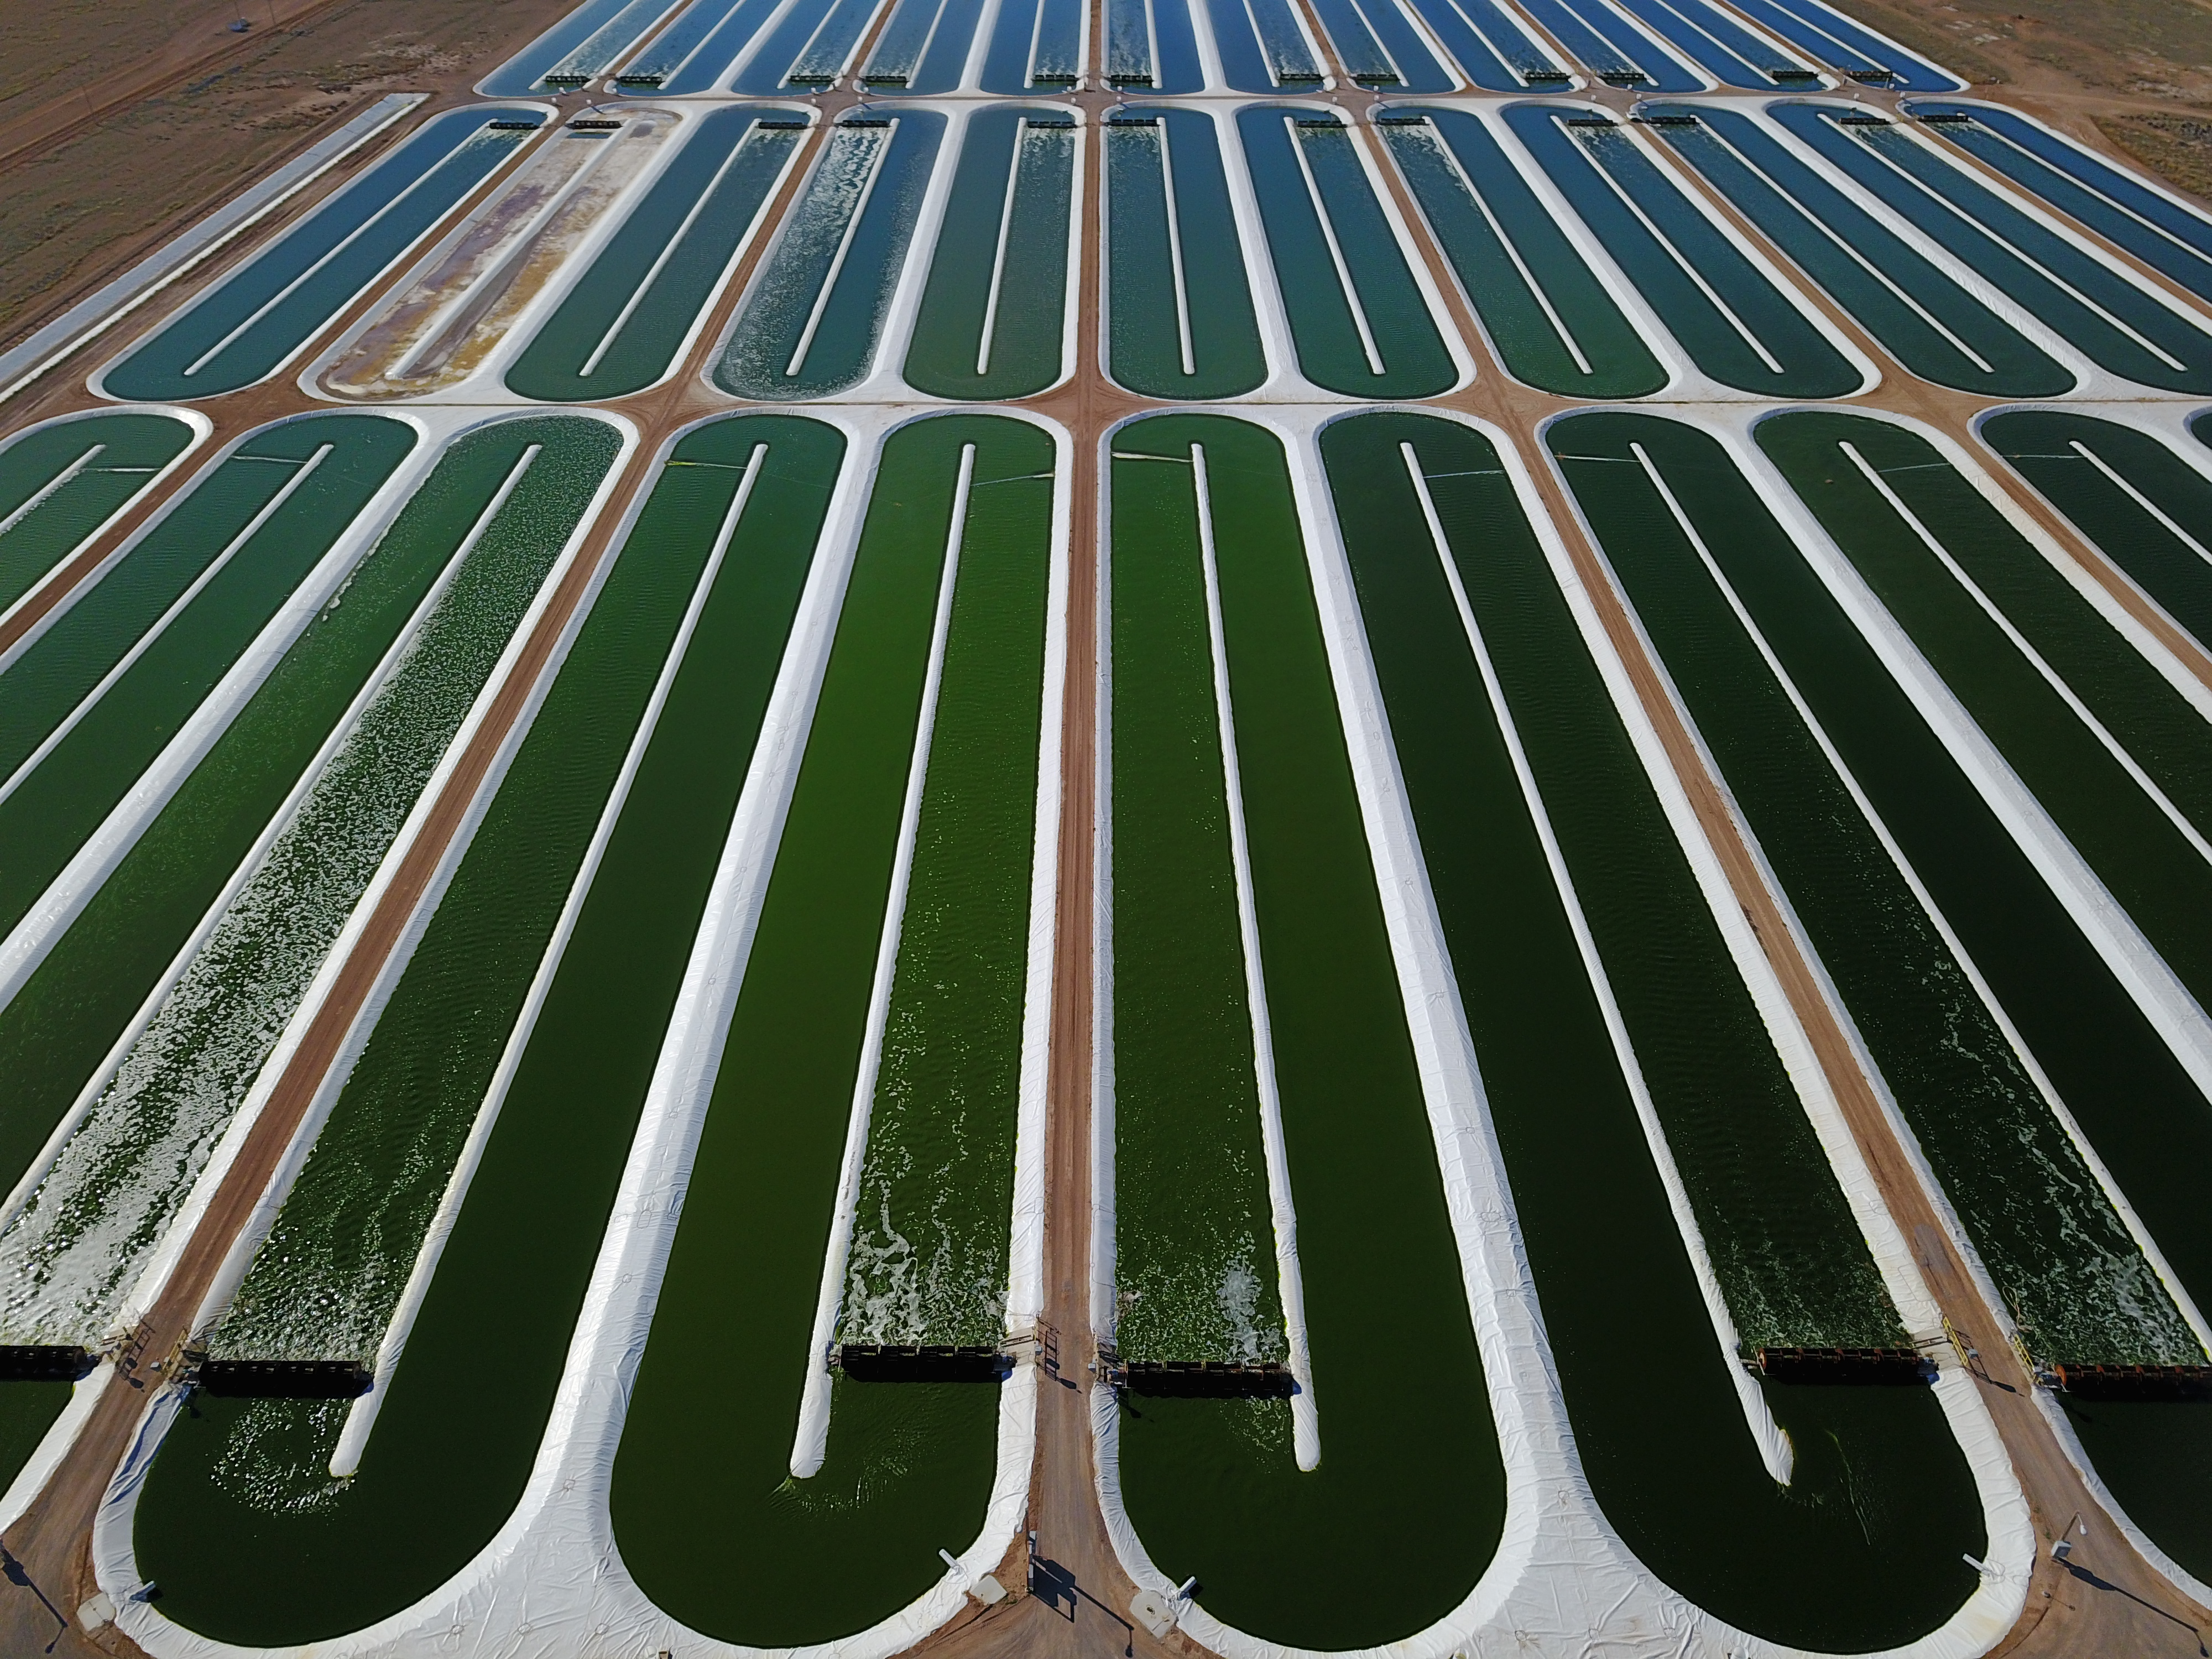 A close up view of iWi's pools of algae growing in the desert.